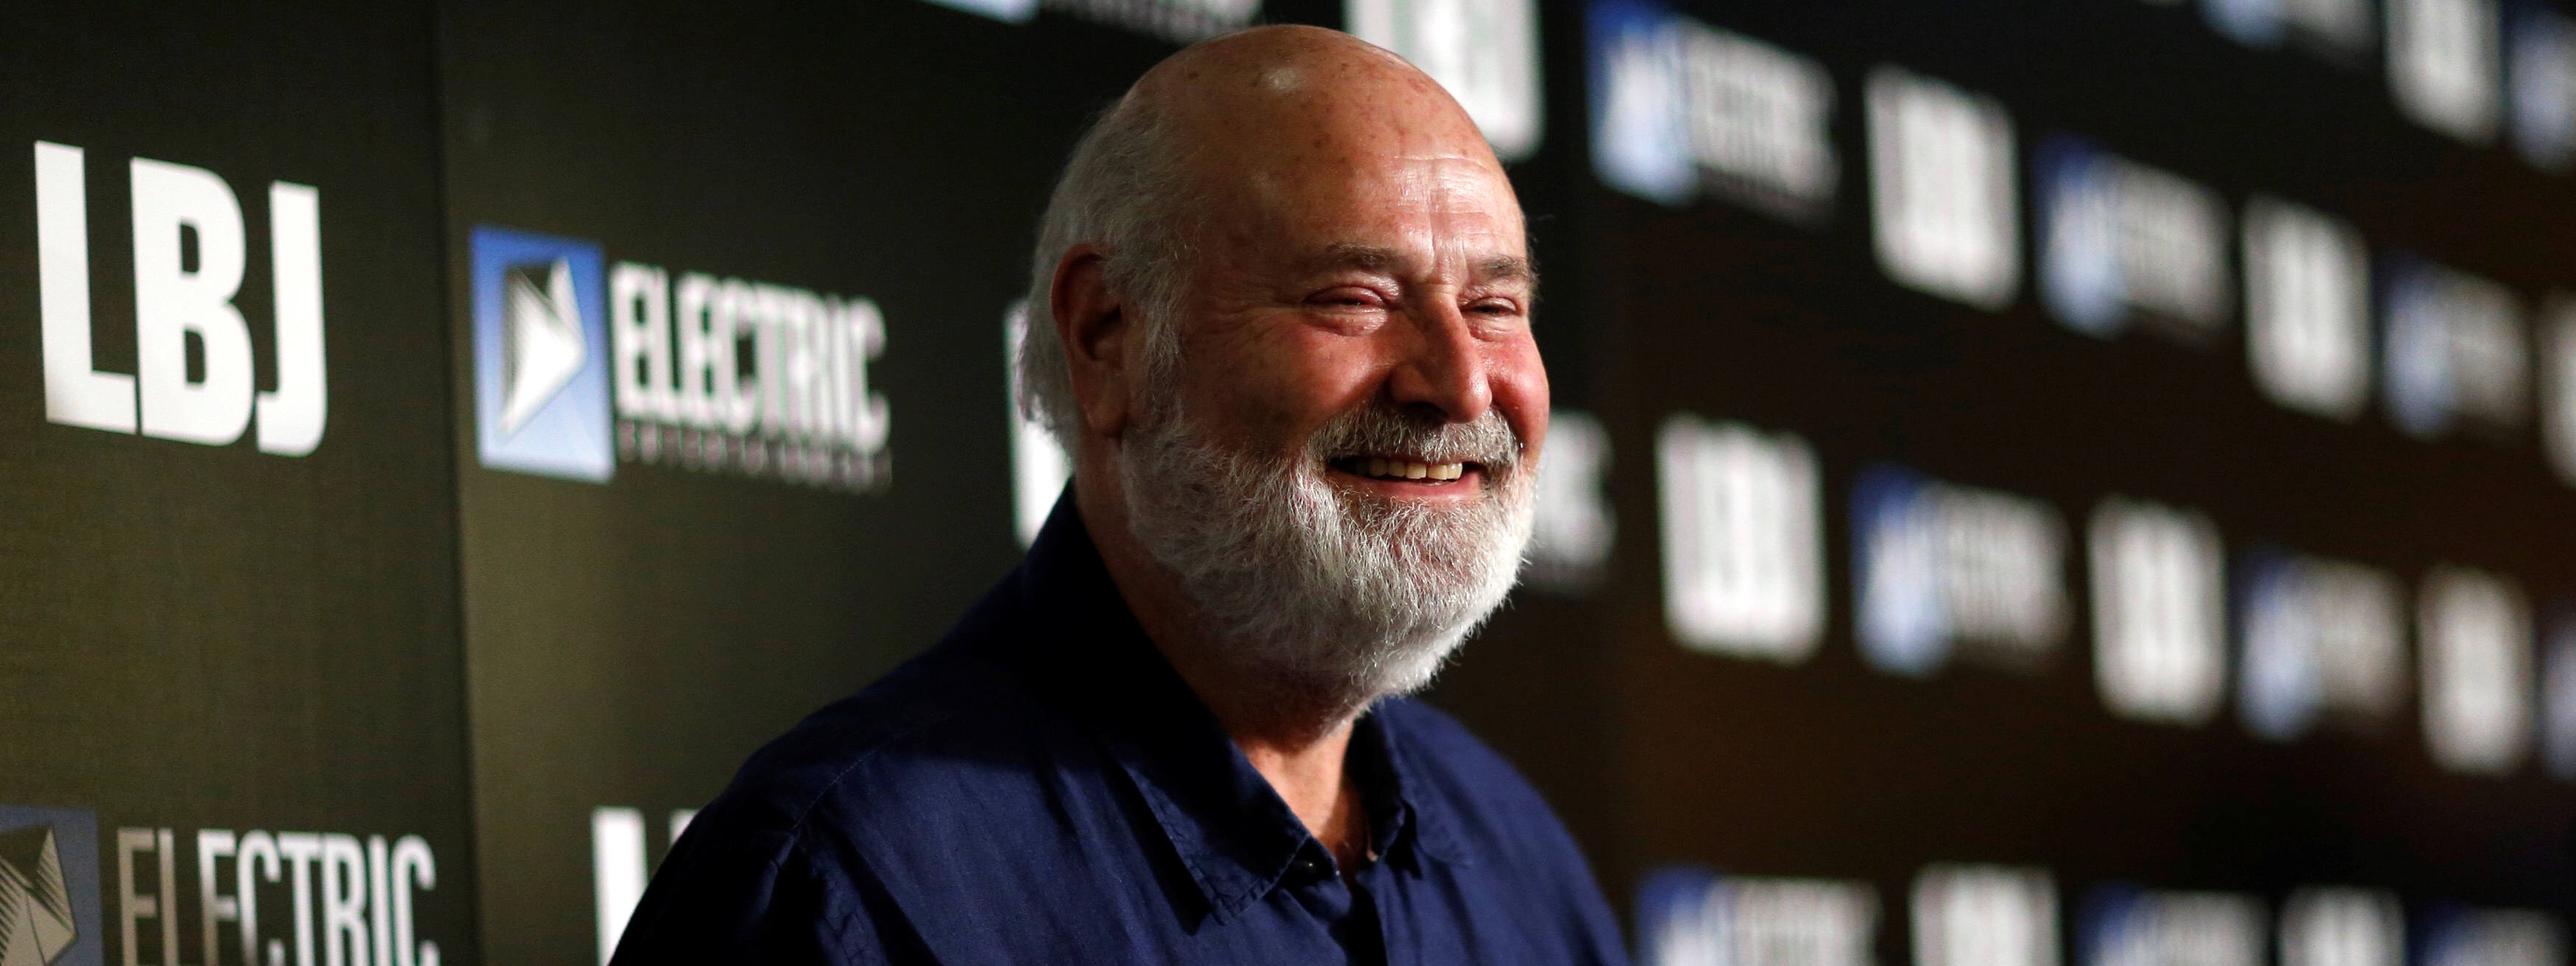 Rob Reiner Says Archie Bunker Was A ‘Lovable Bigot’ While Trump Is ‘A Racist ...